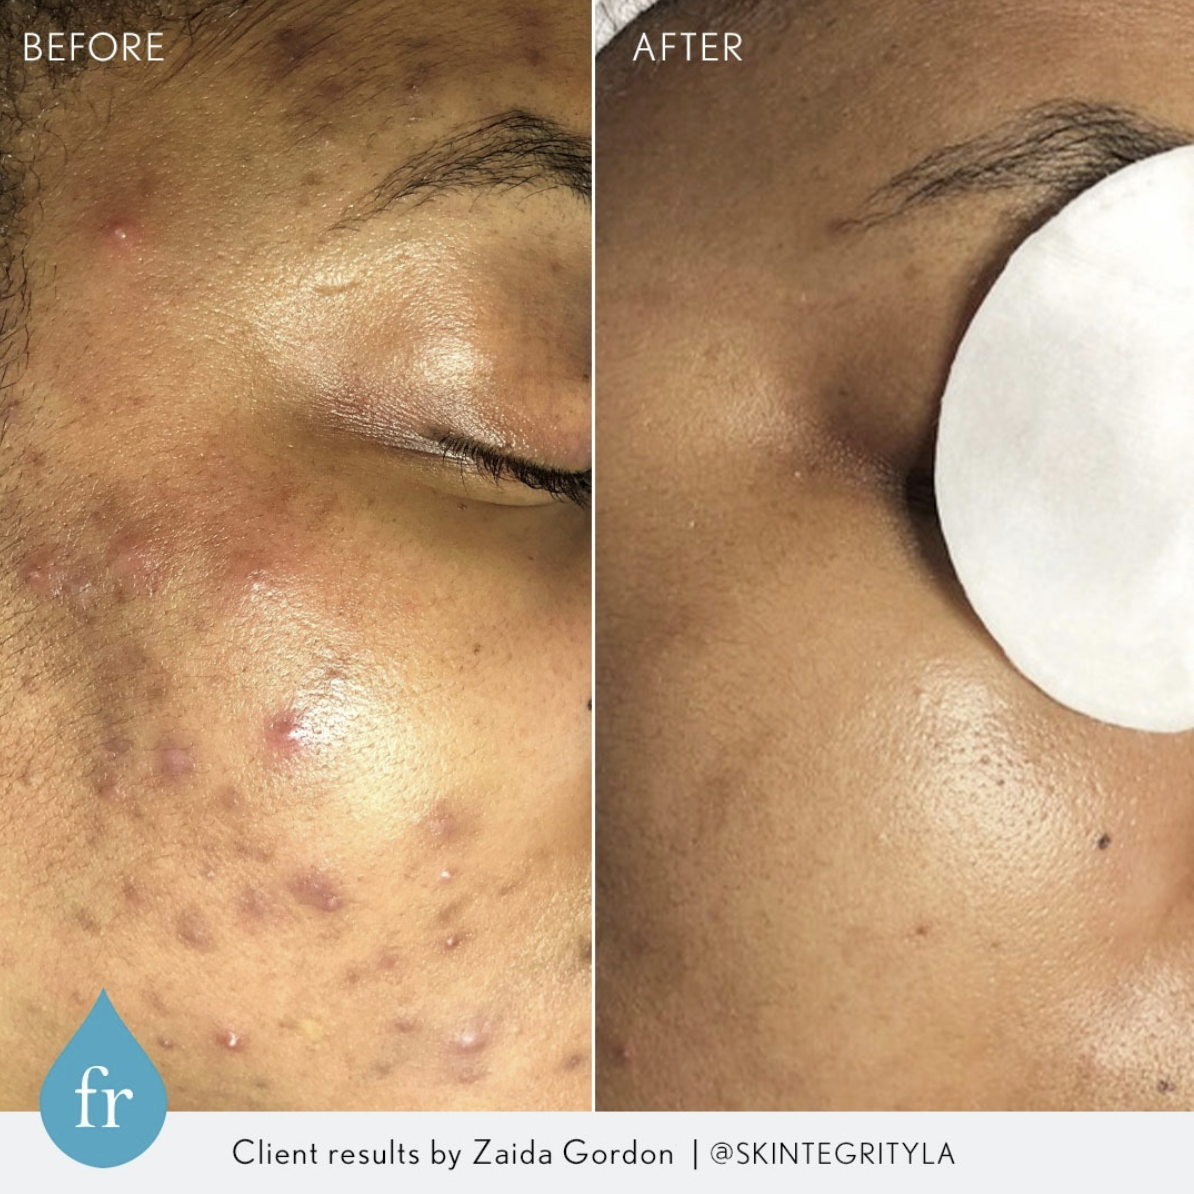 before and after pictures of skin treated with Face Reality